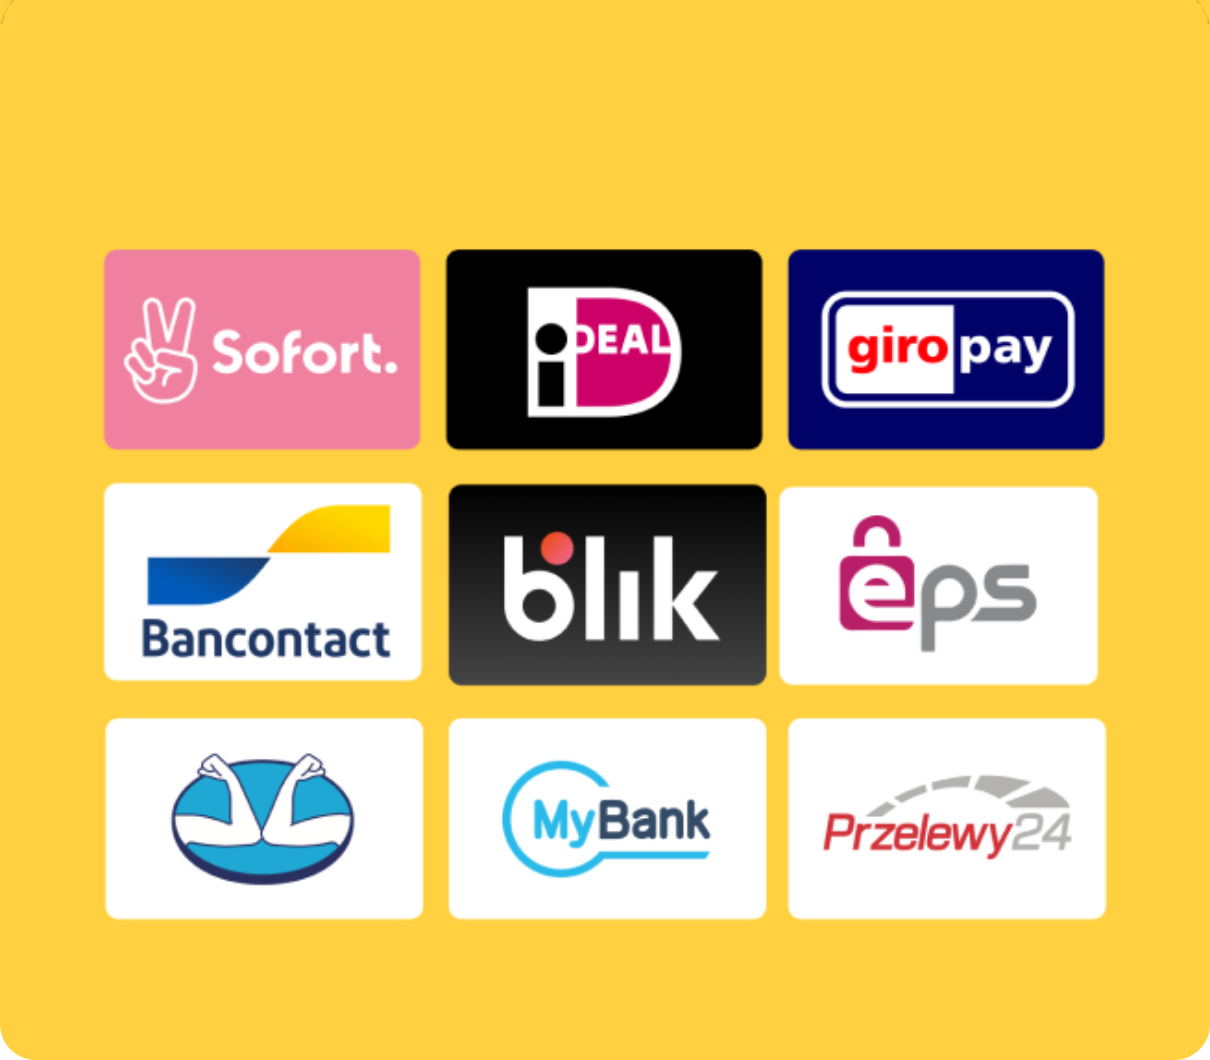 List of country-specific payment method logos. Sofort, iDeal, Giro Pay, Bancontact, blik, eps, MyBank, and Przelewy24 are listed.